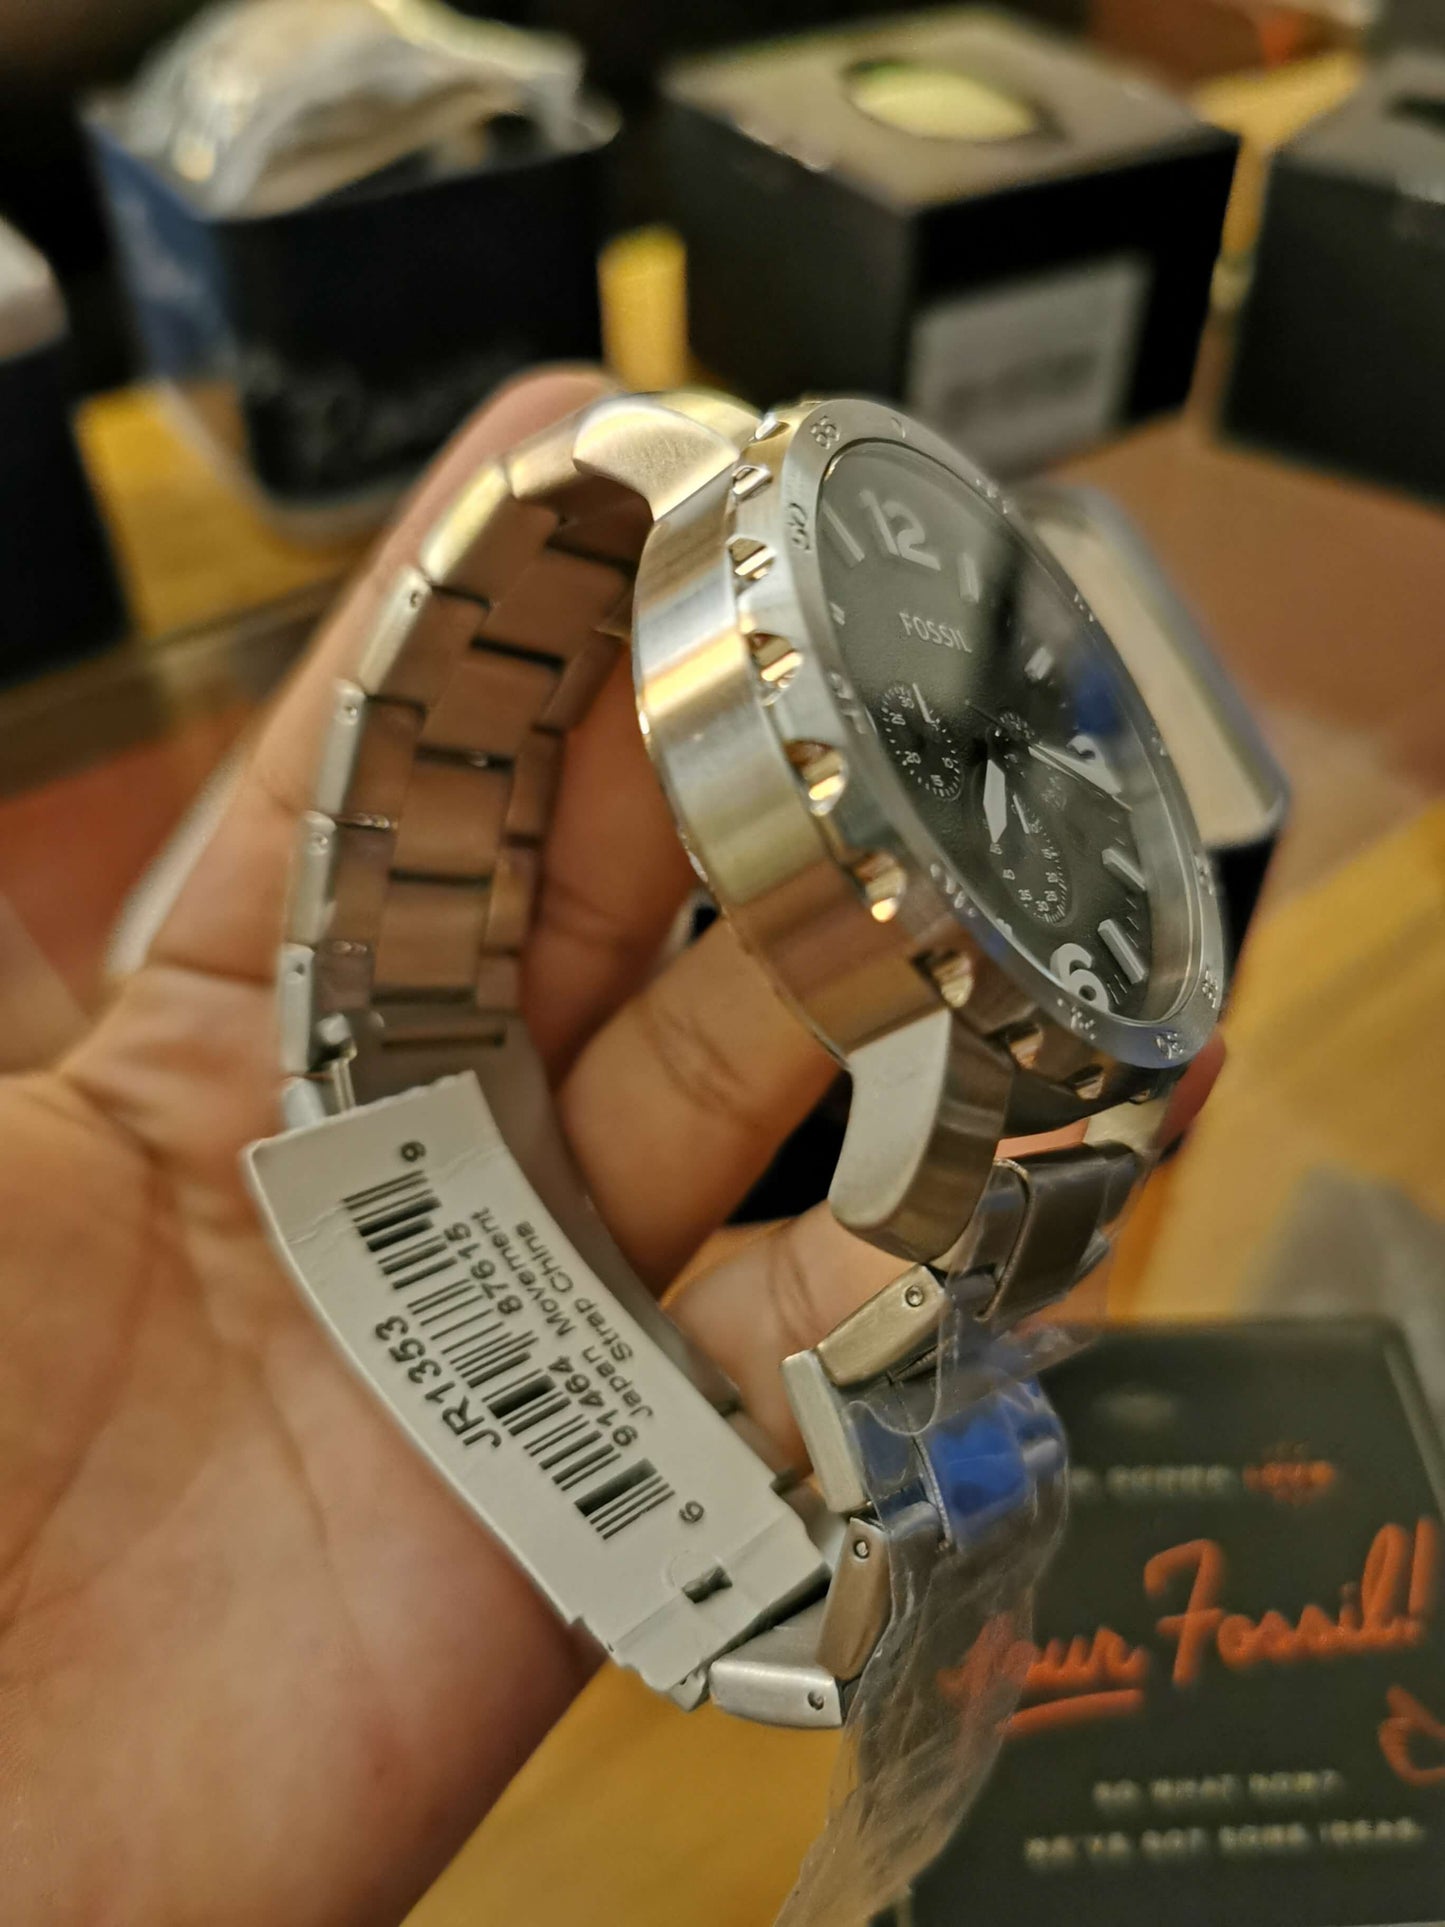 Fossil Nate | Hombre | JR1353 / RMFS35